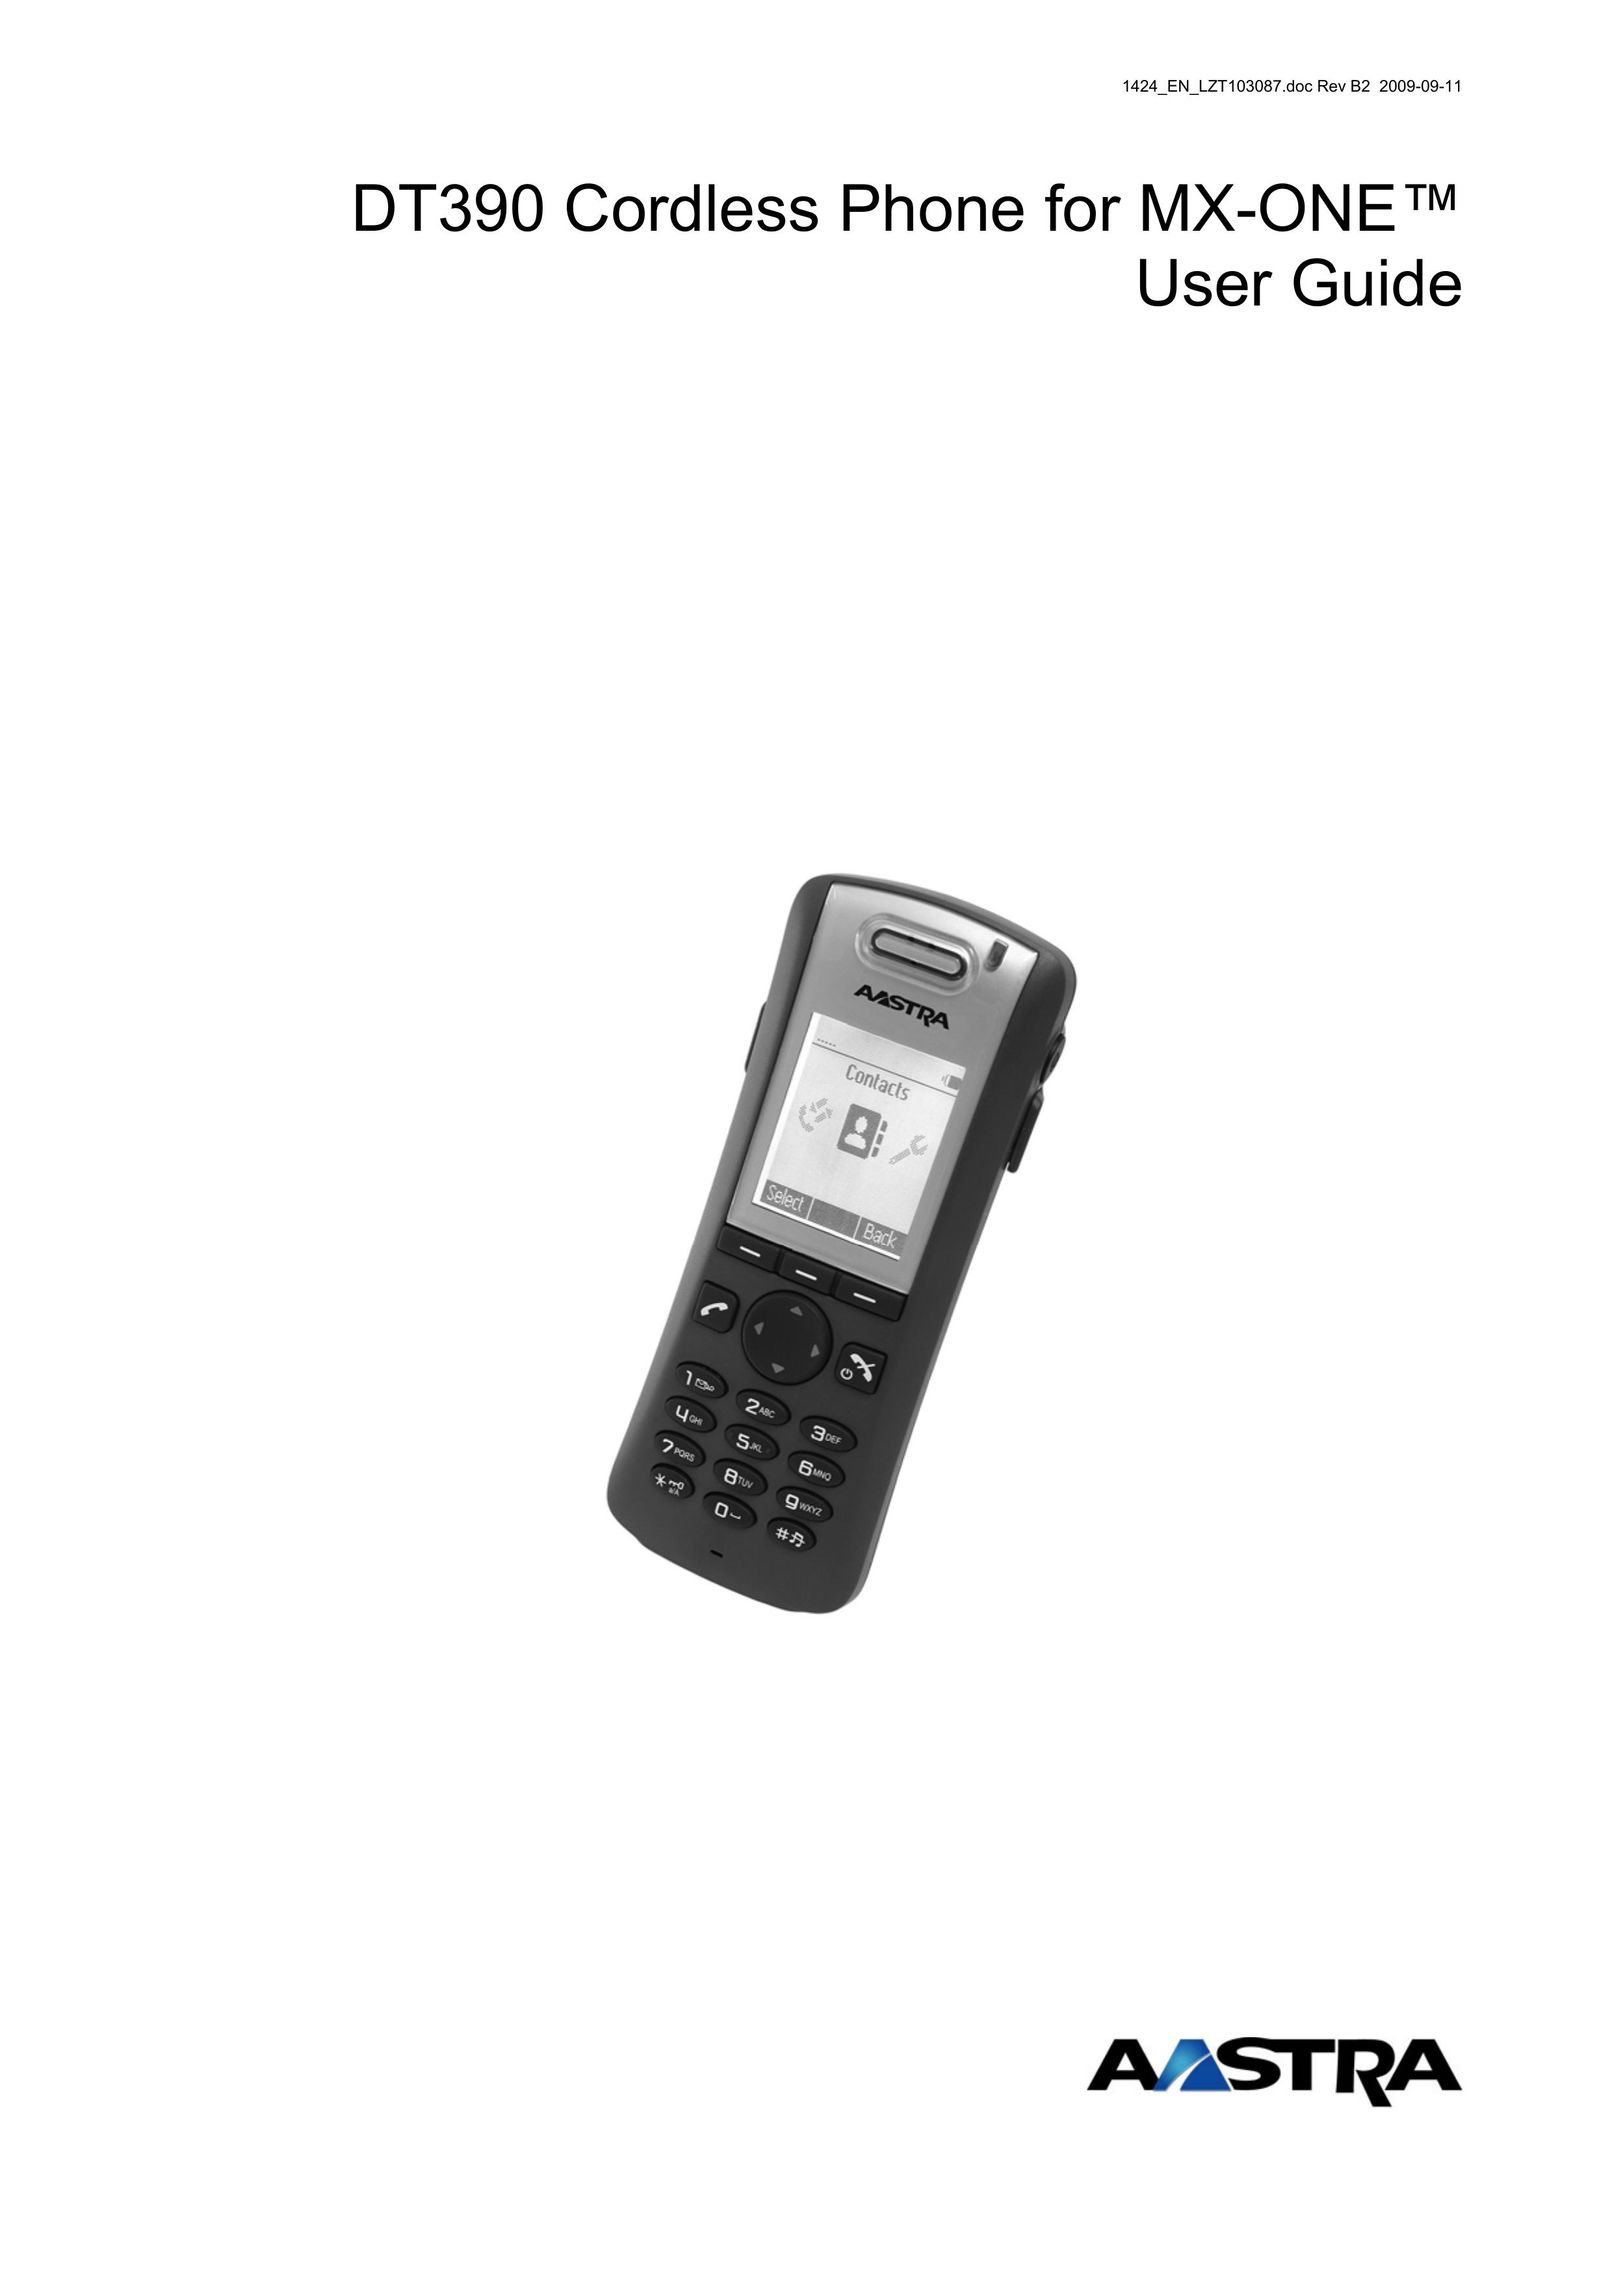 Aastra Telecom DT390 Cordless Telephone User Manual